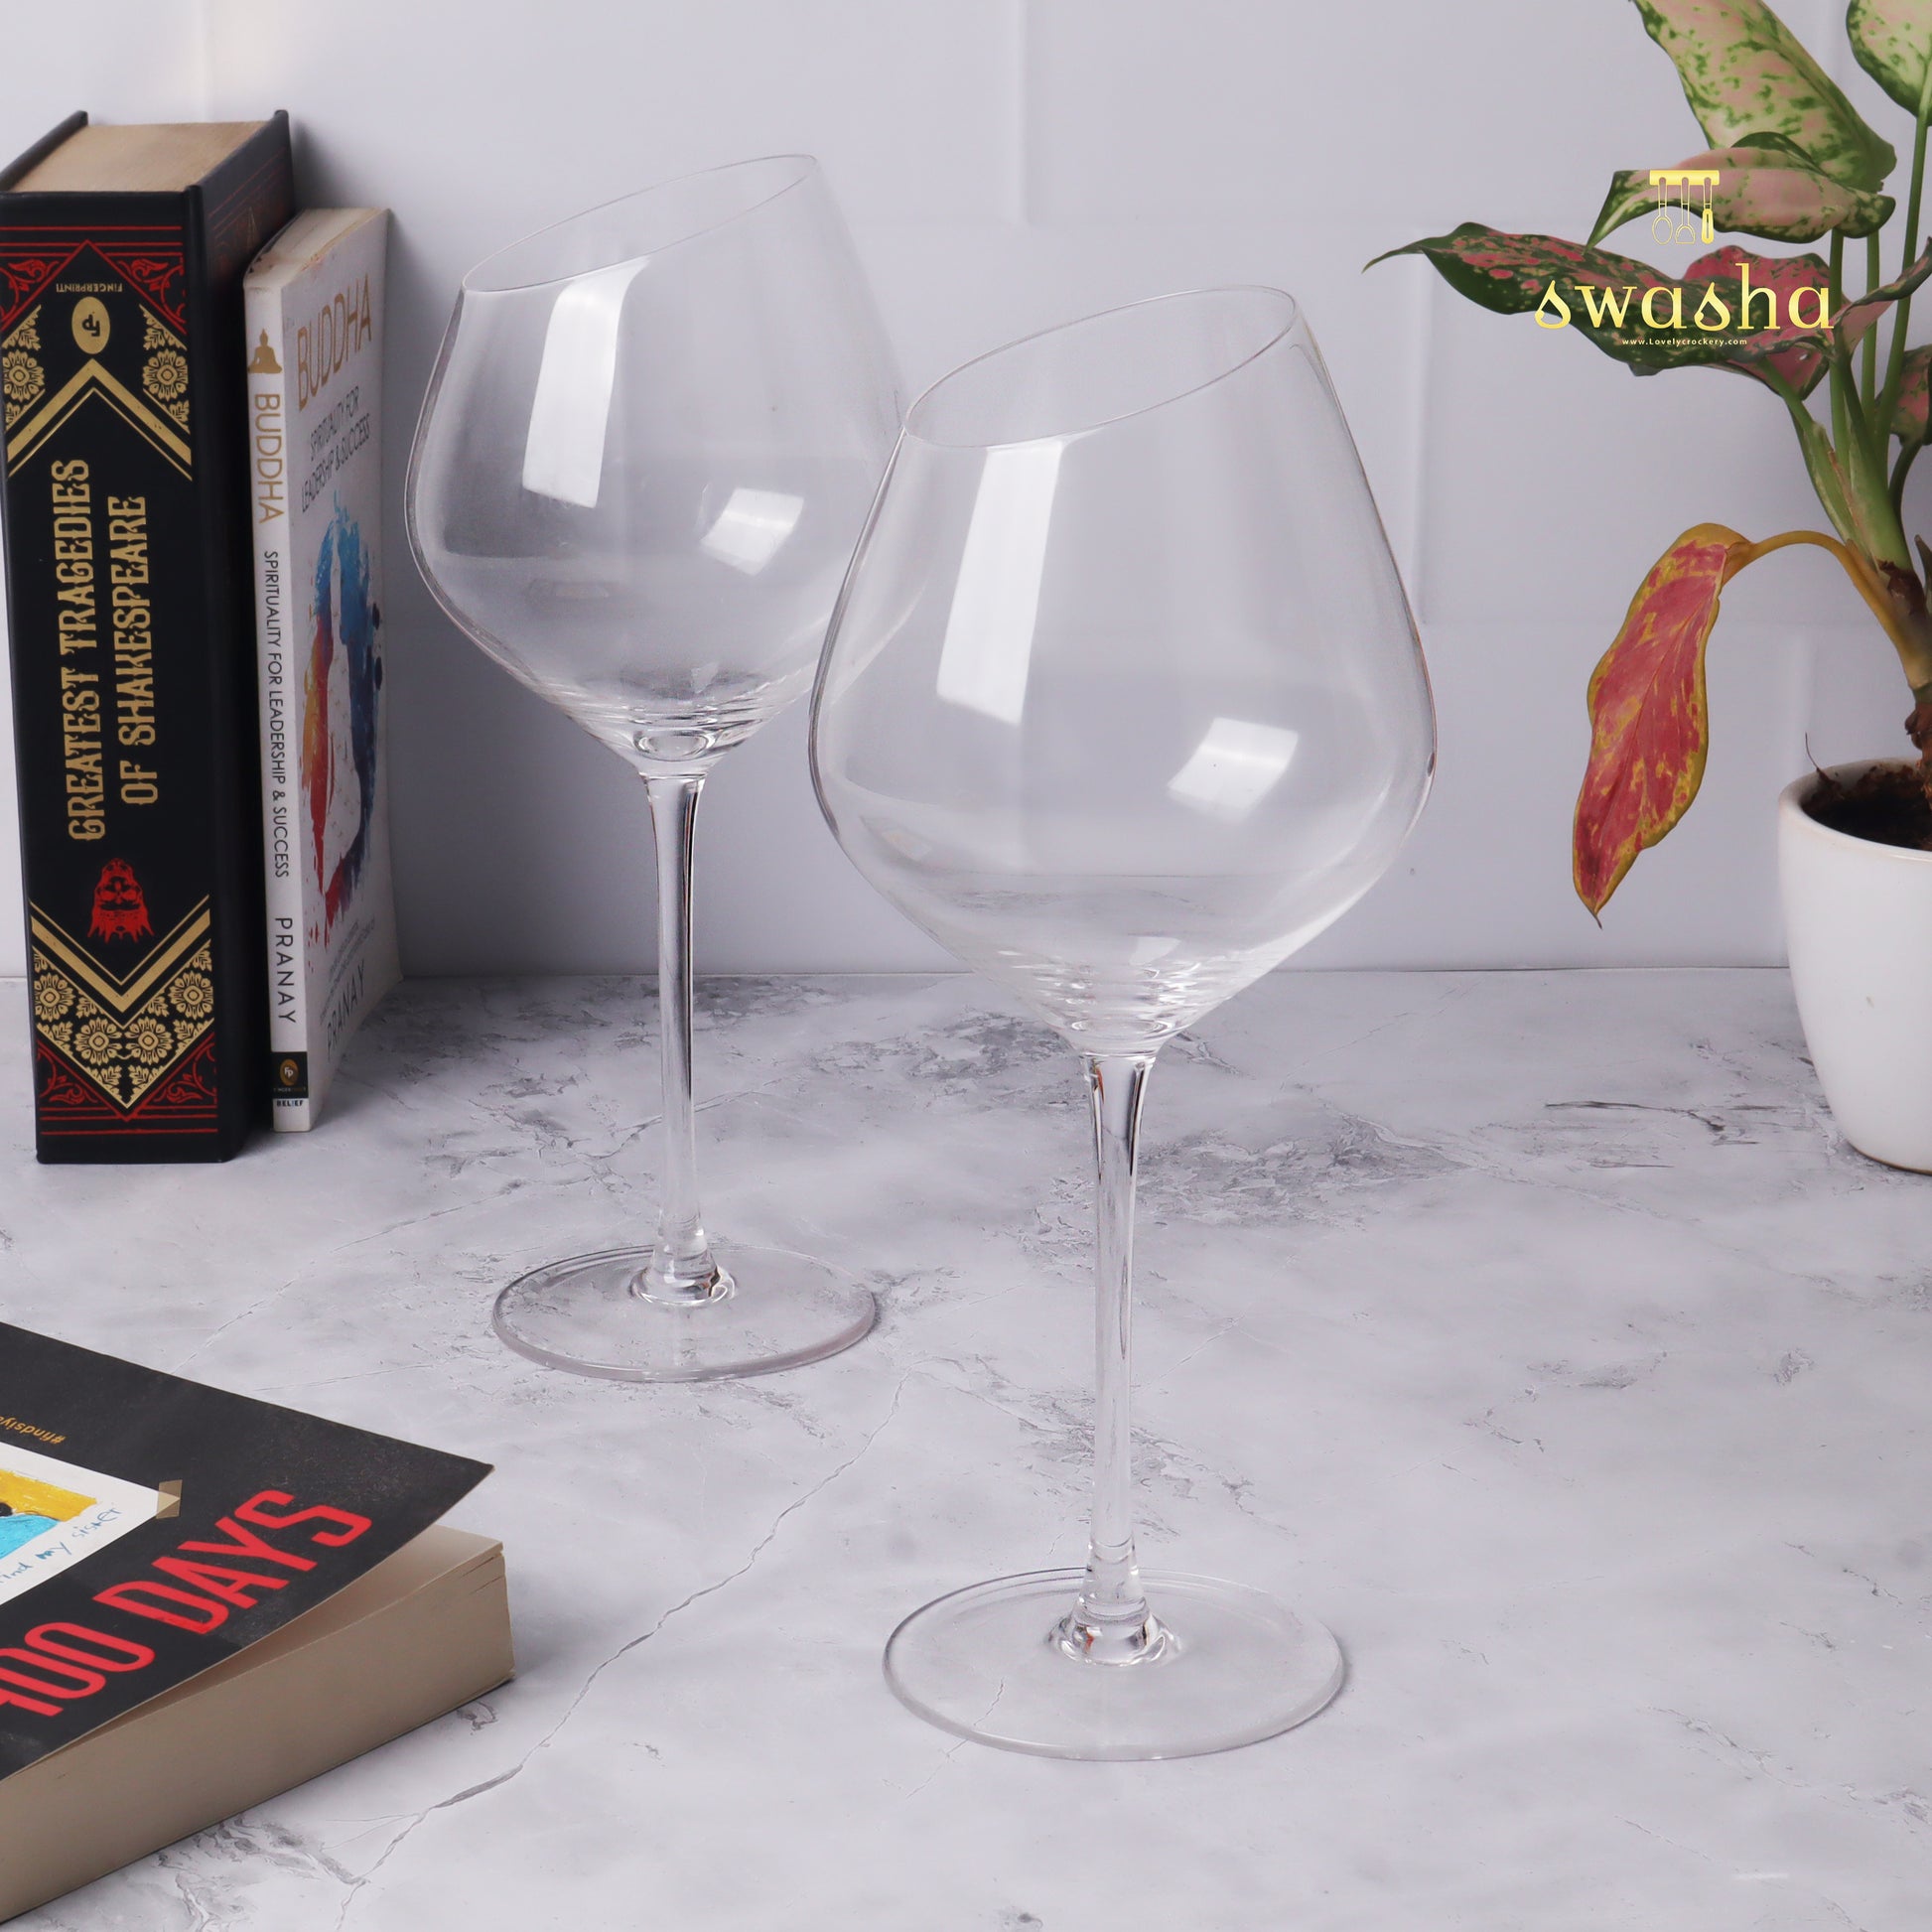 Set of 6 elegant wine glasses - elevate your dining experience with this classic set